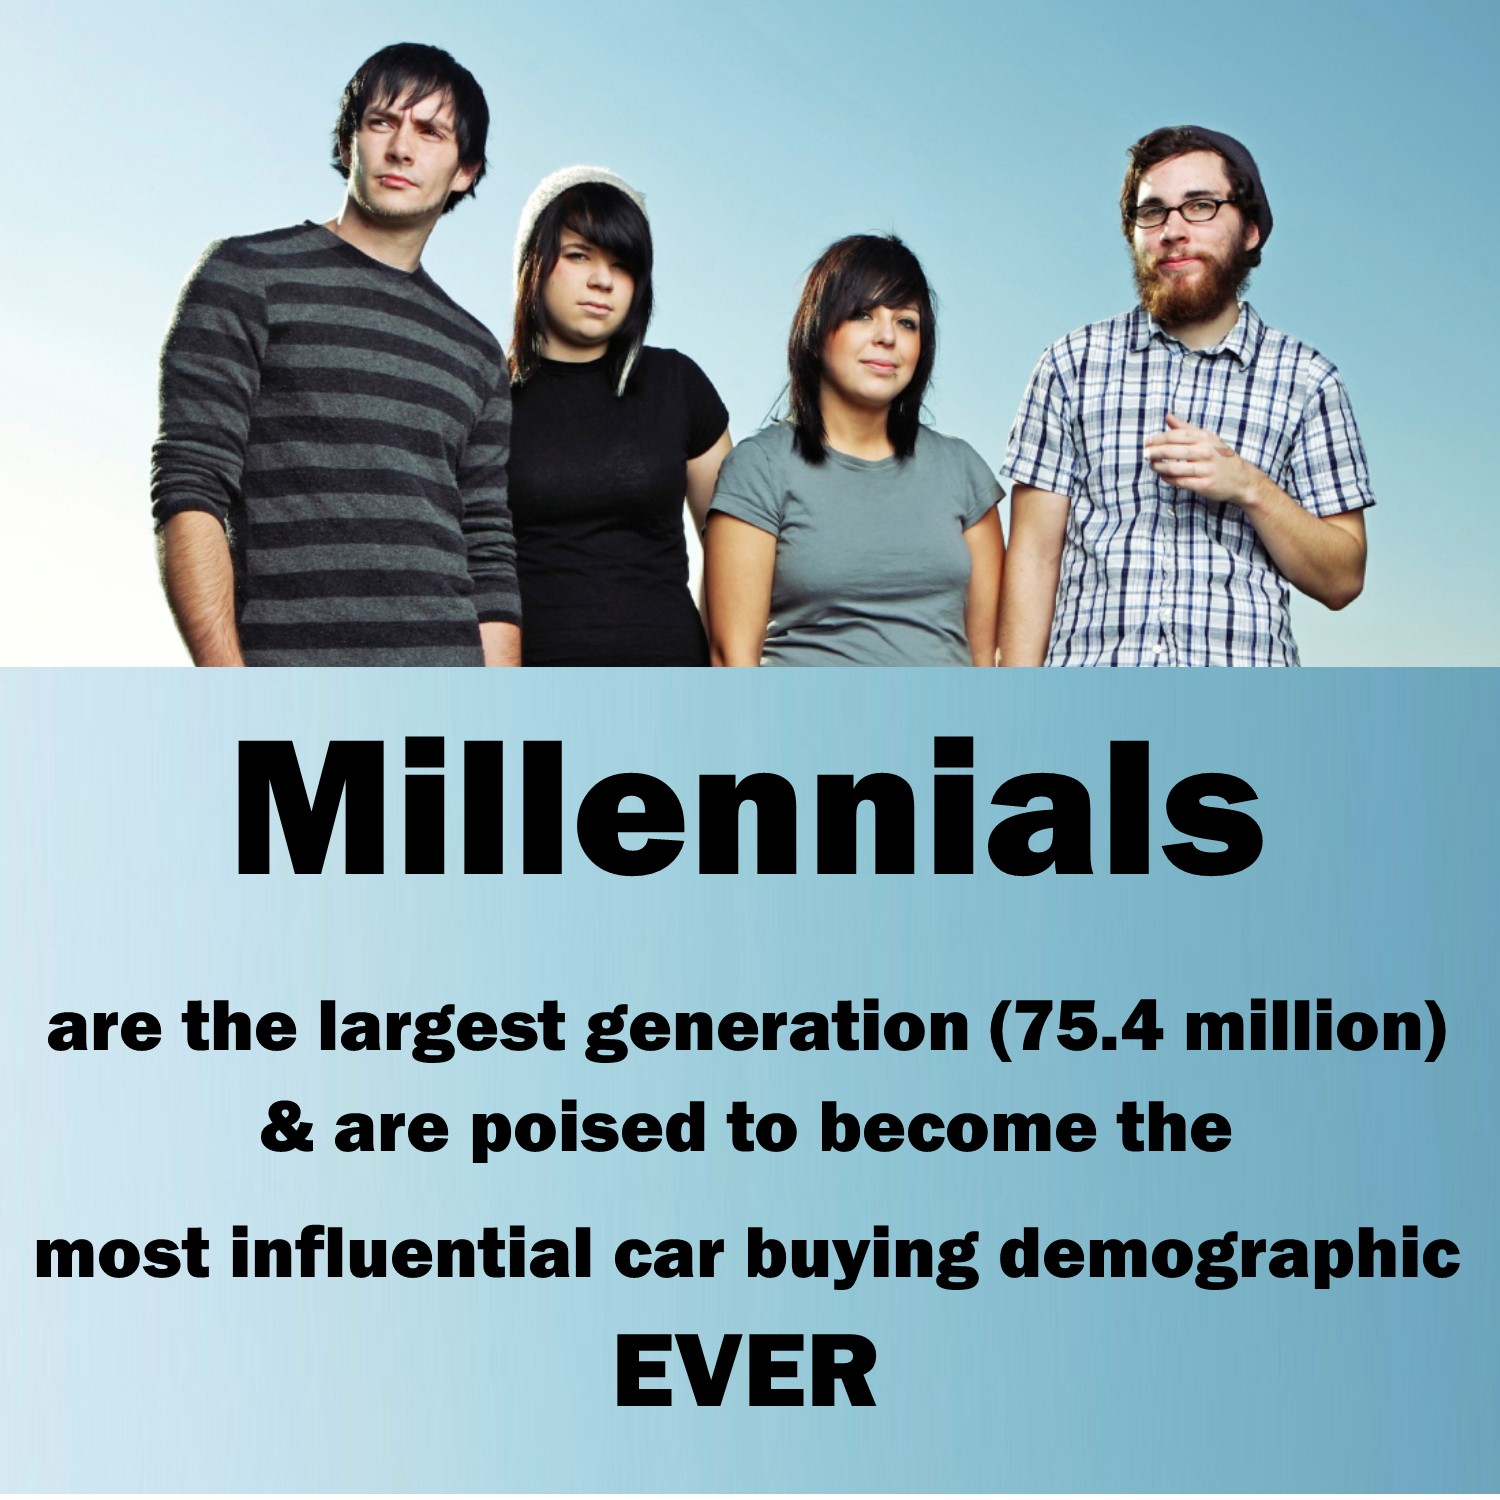 Millenials are the largest generation (75.4 million) & are poised to become the most influential car buying demographic